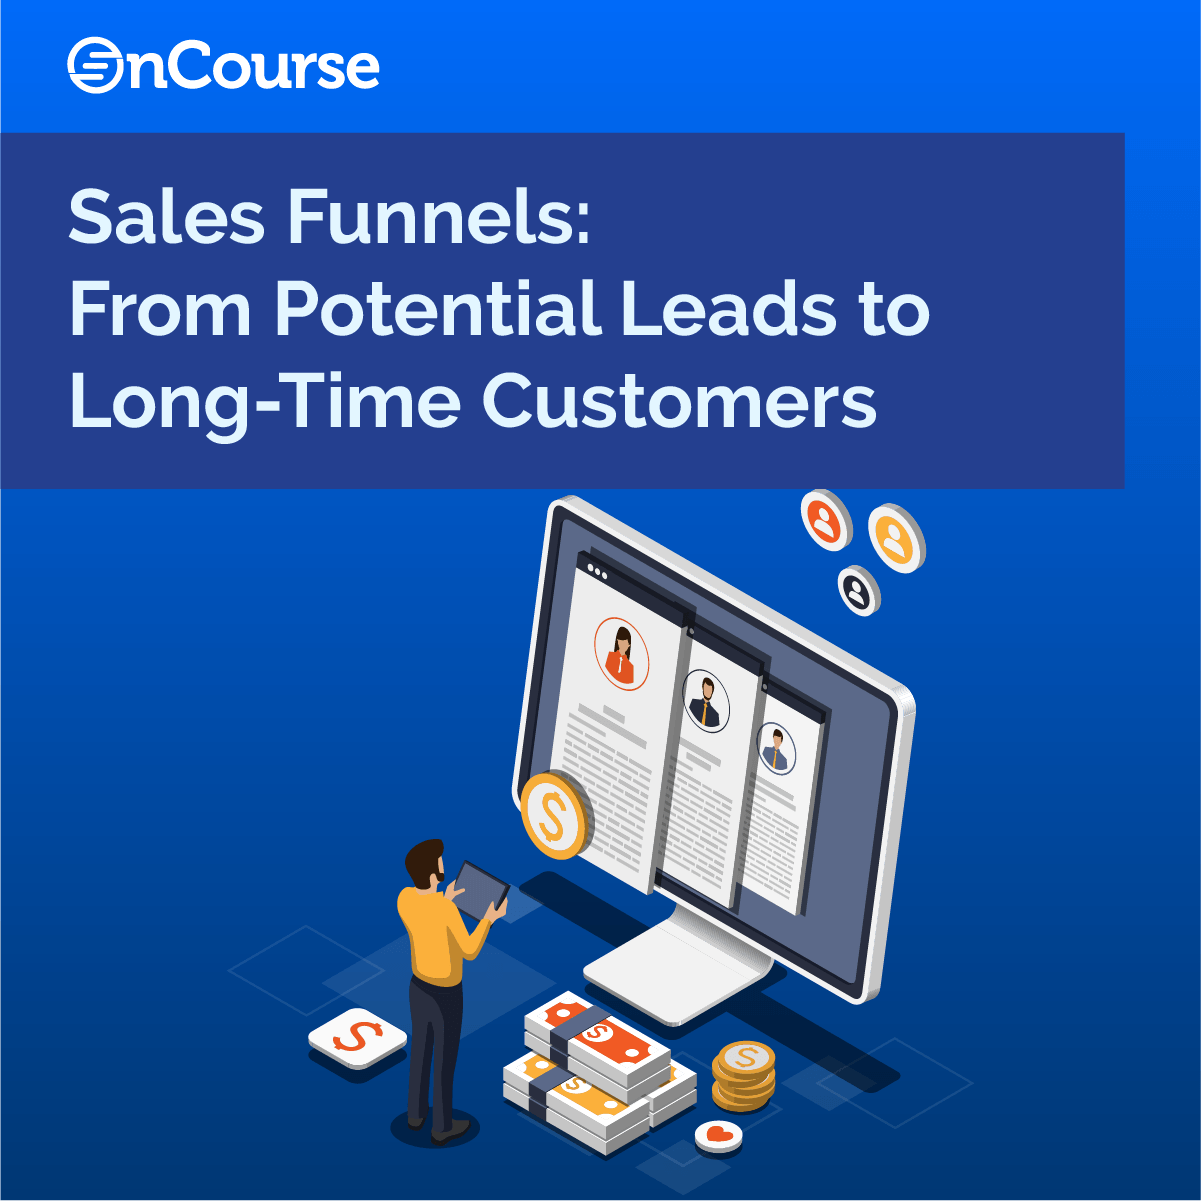 Sales Funnels: From Potential Leads to Long-Time Customers